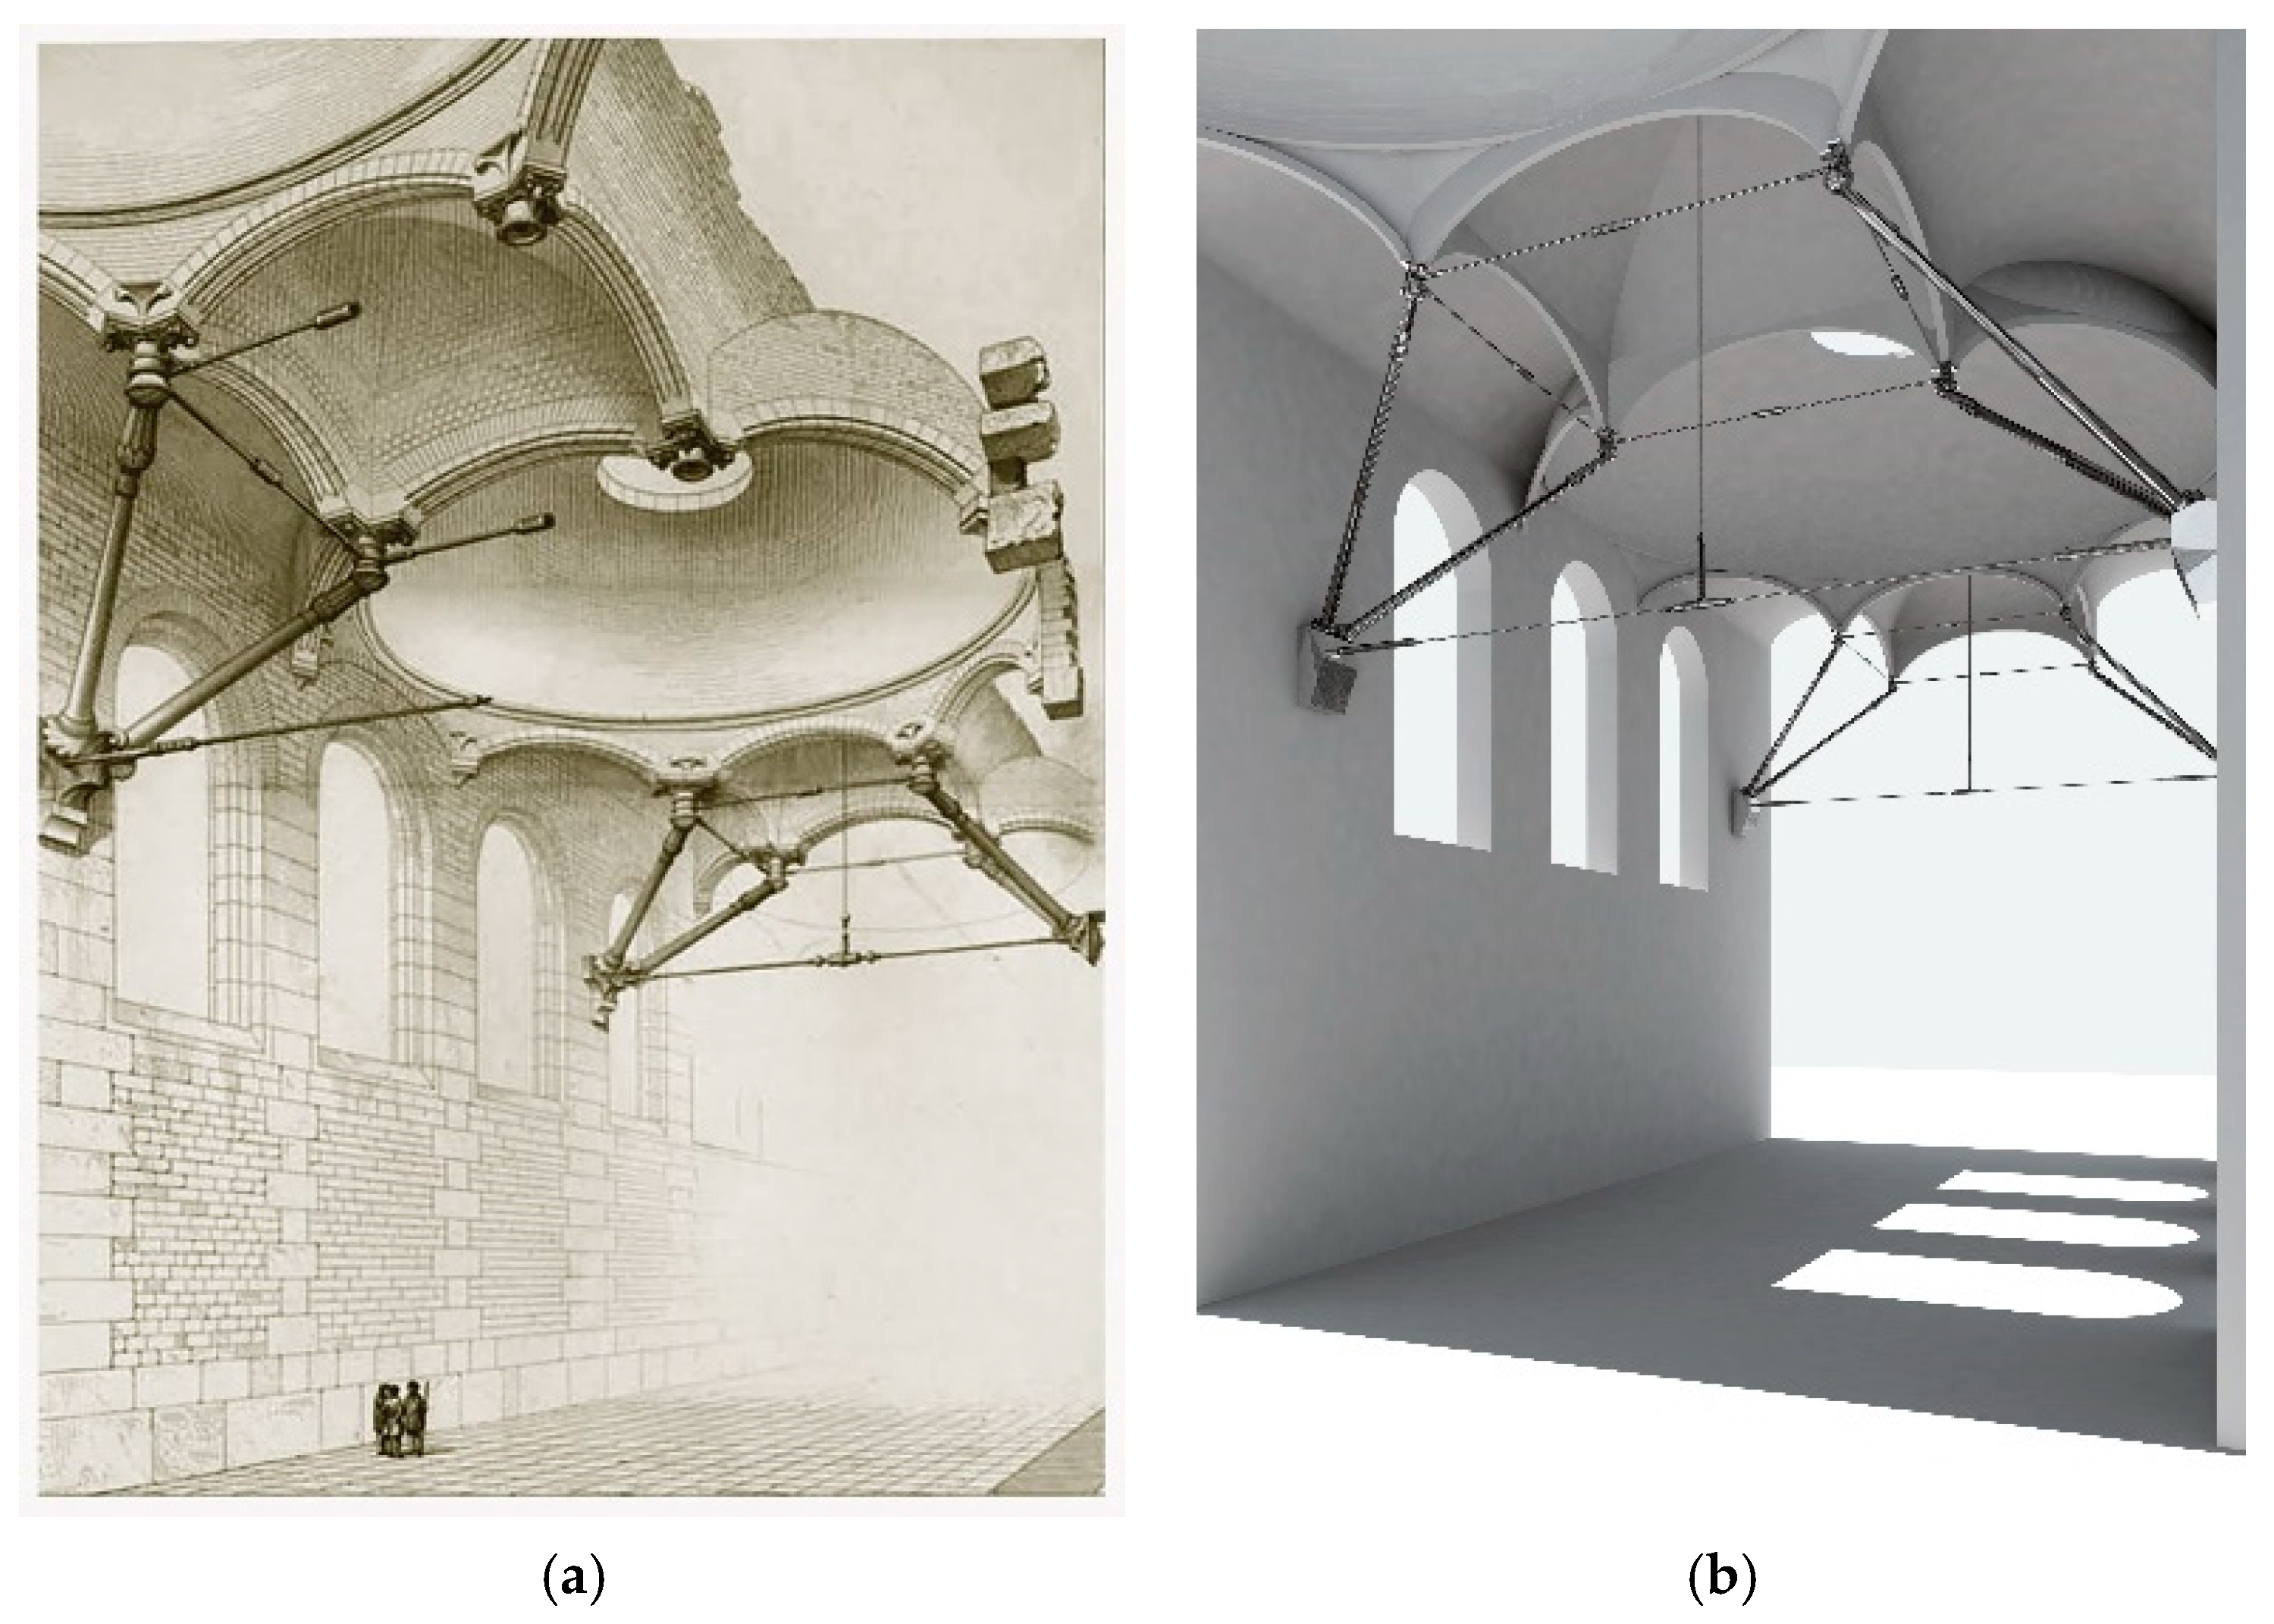 materials free full text a simulation study to calculate a structure conceived by eugene viollet le duc in 1850 with finite element analysis html